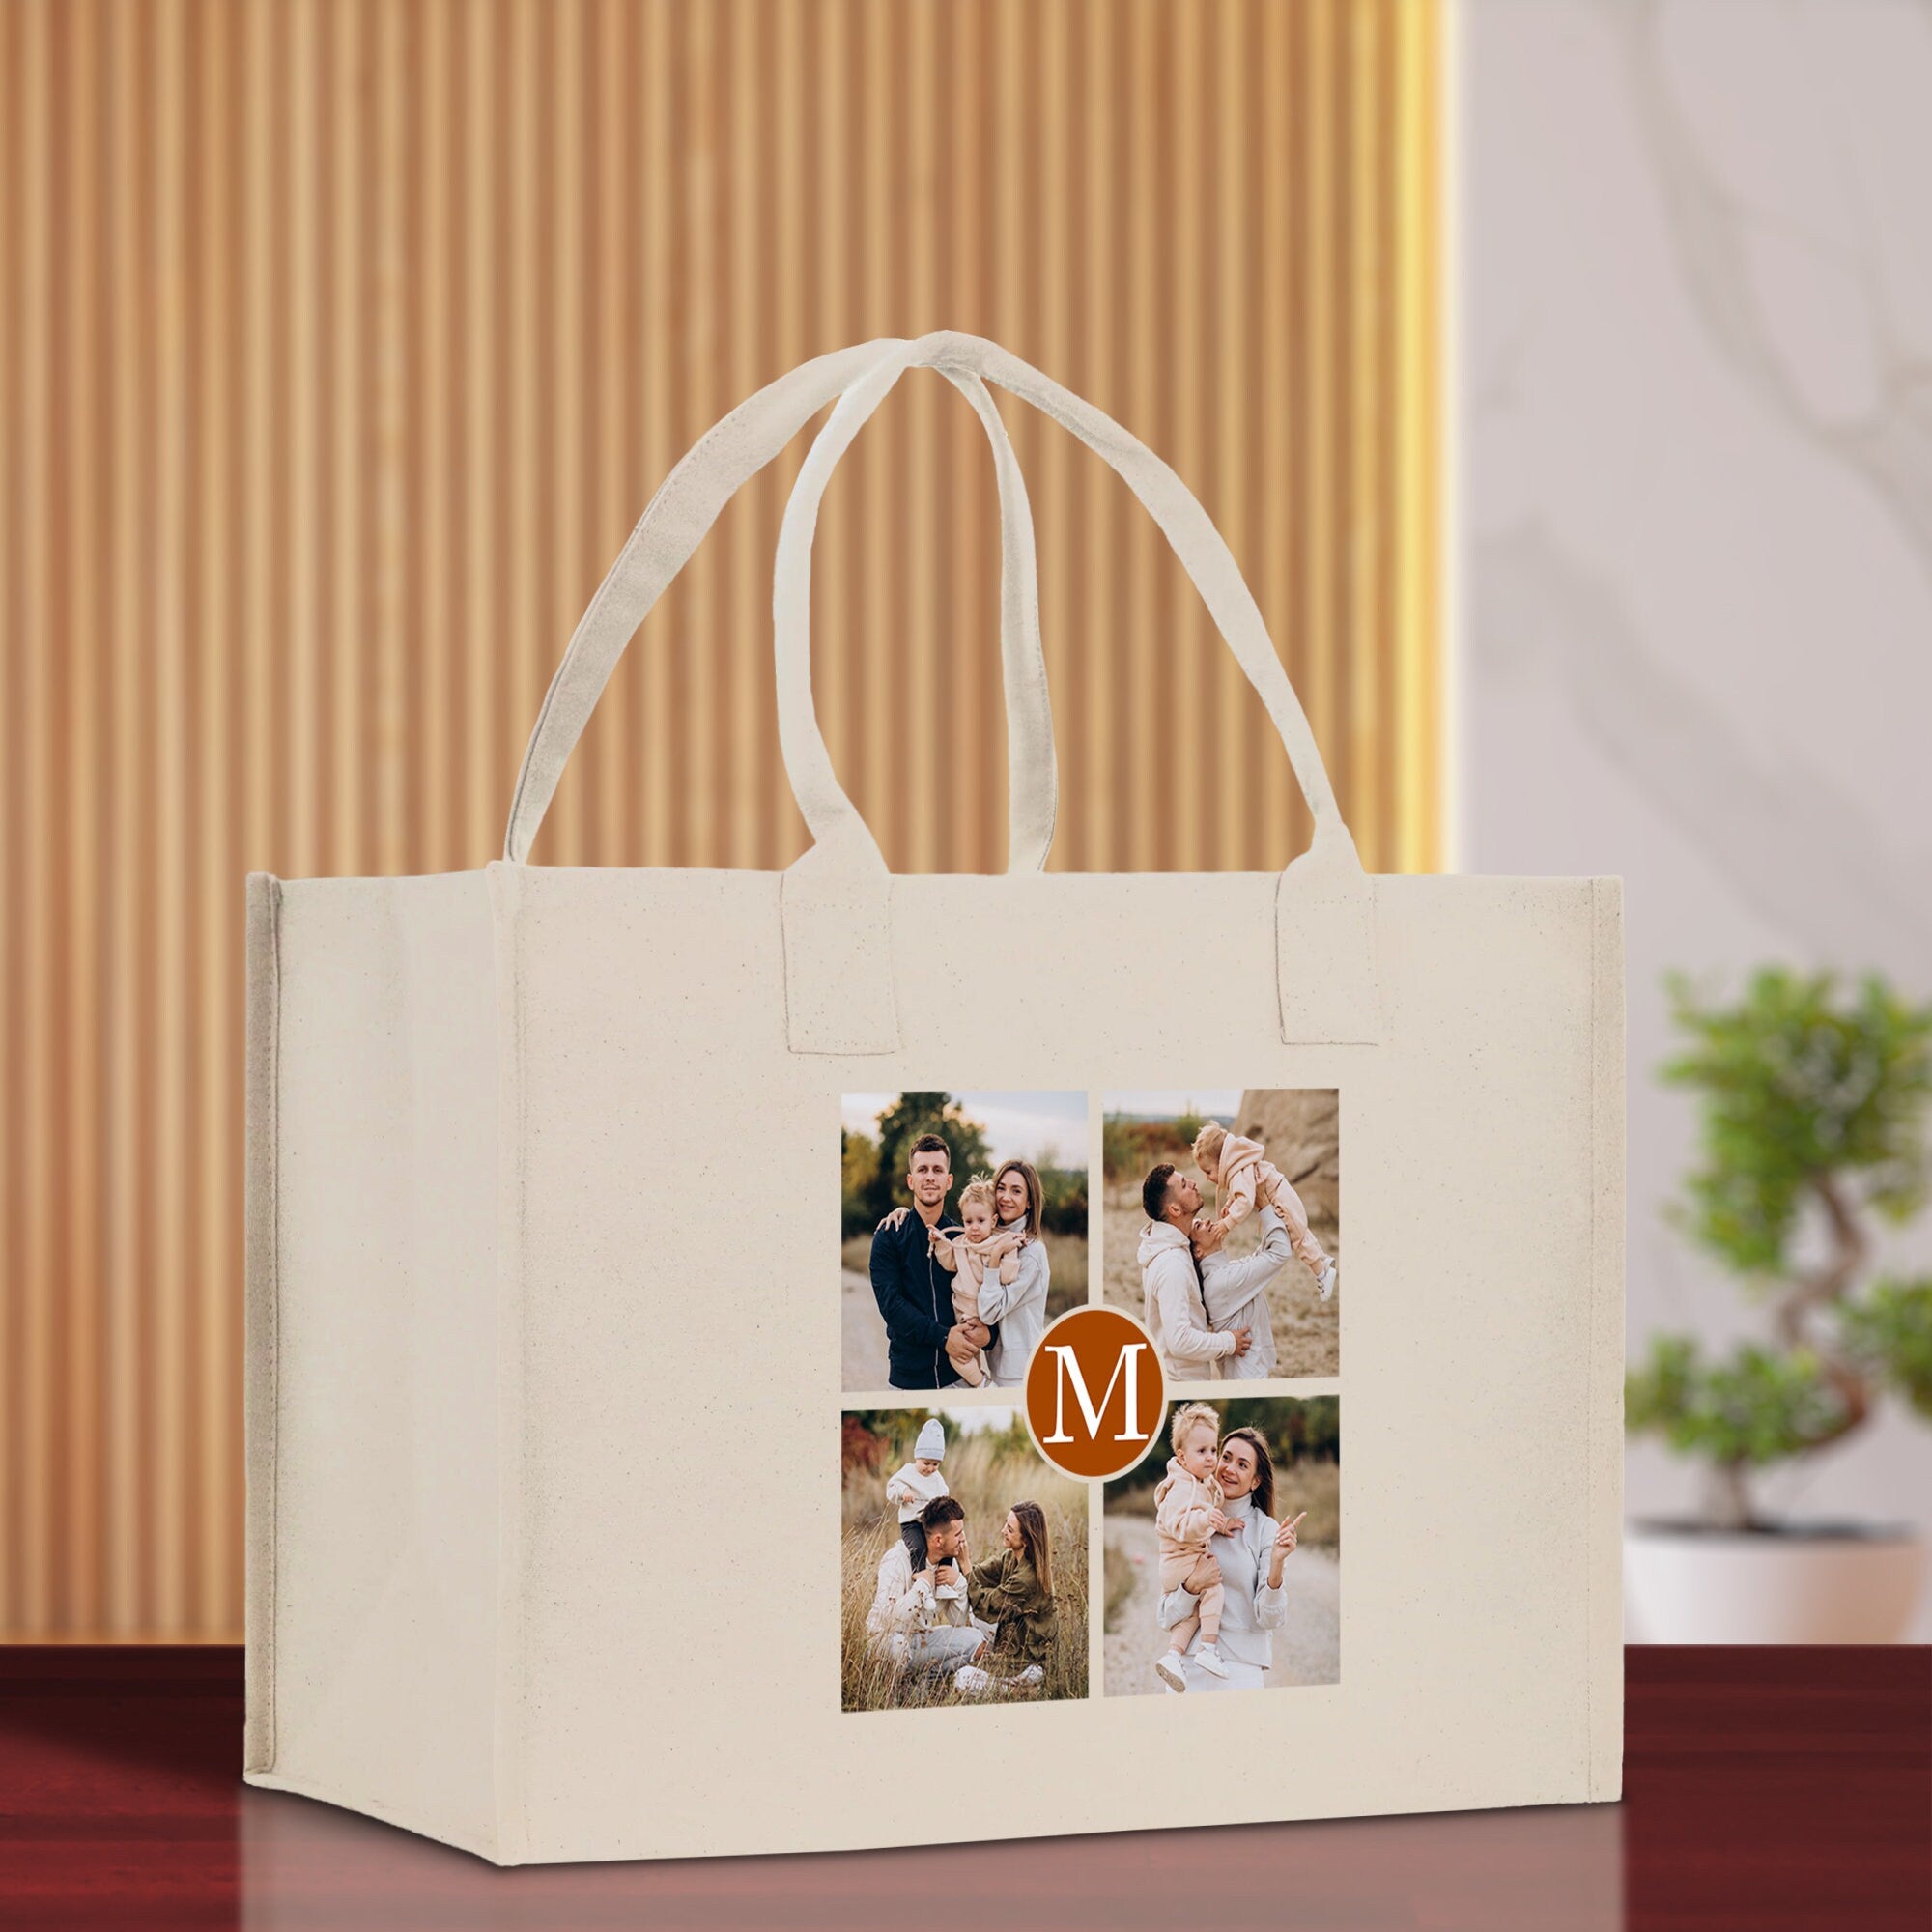 a white bag with a picture of two women and a man on it